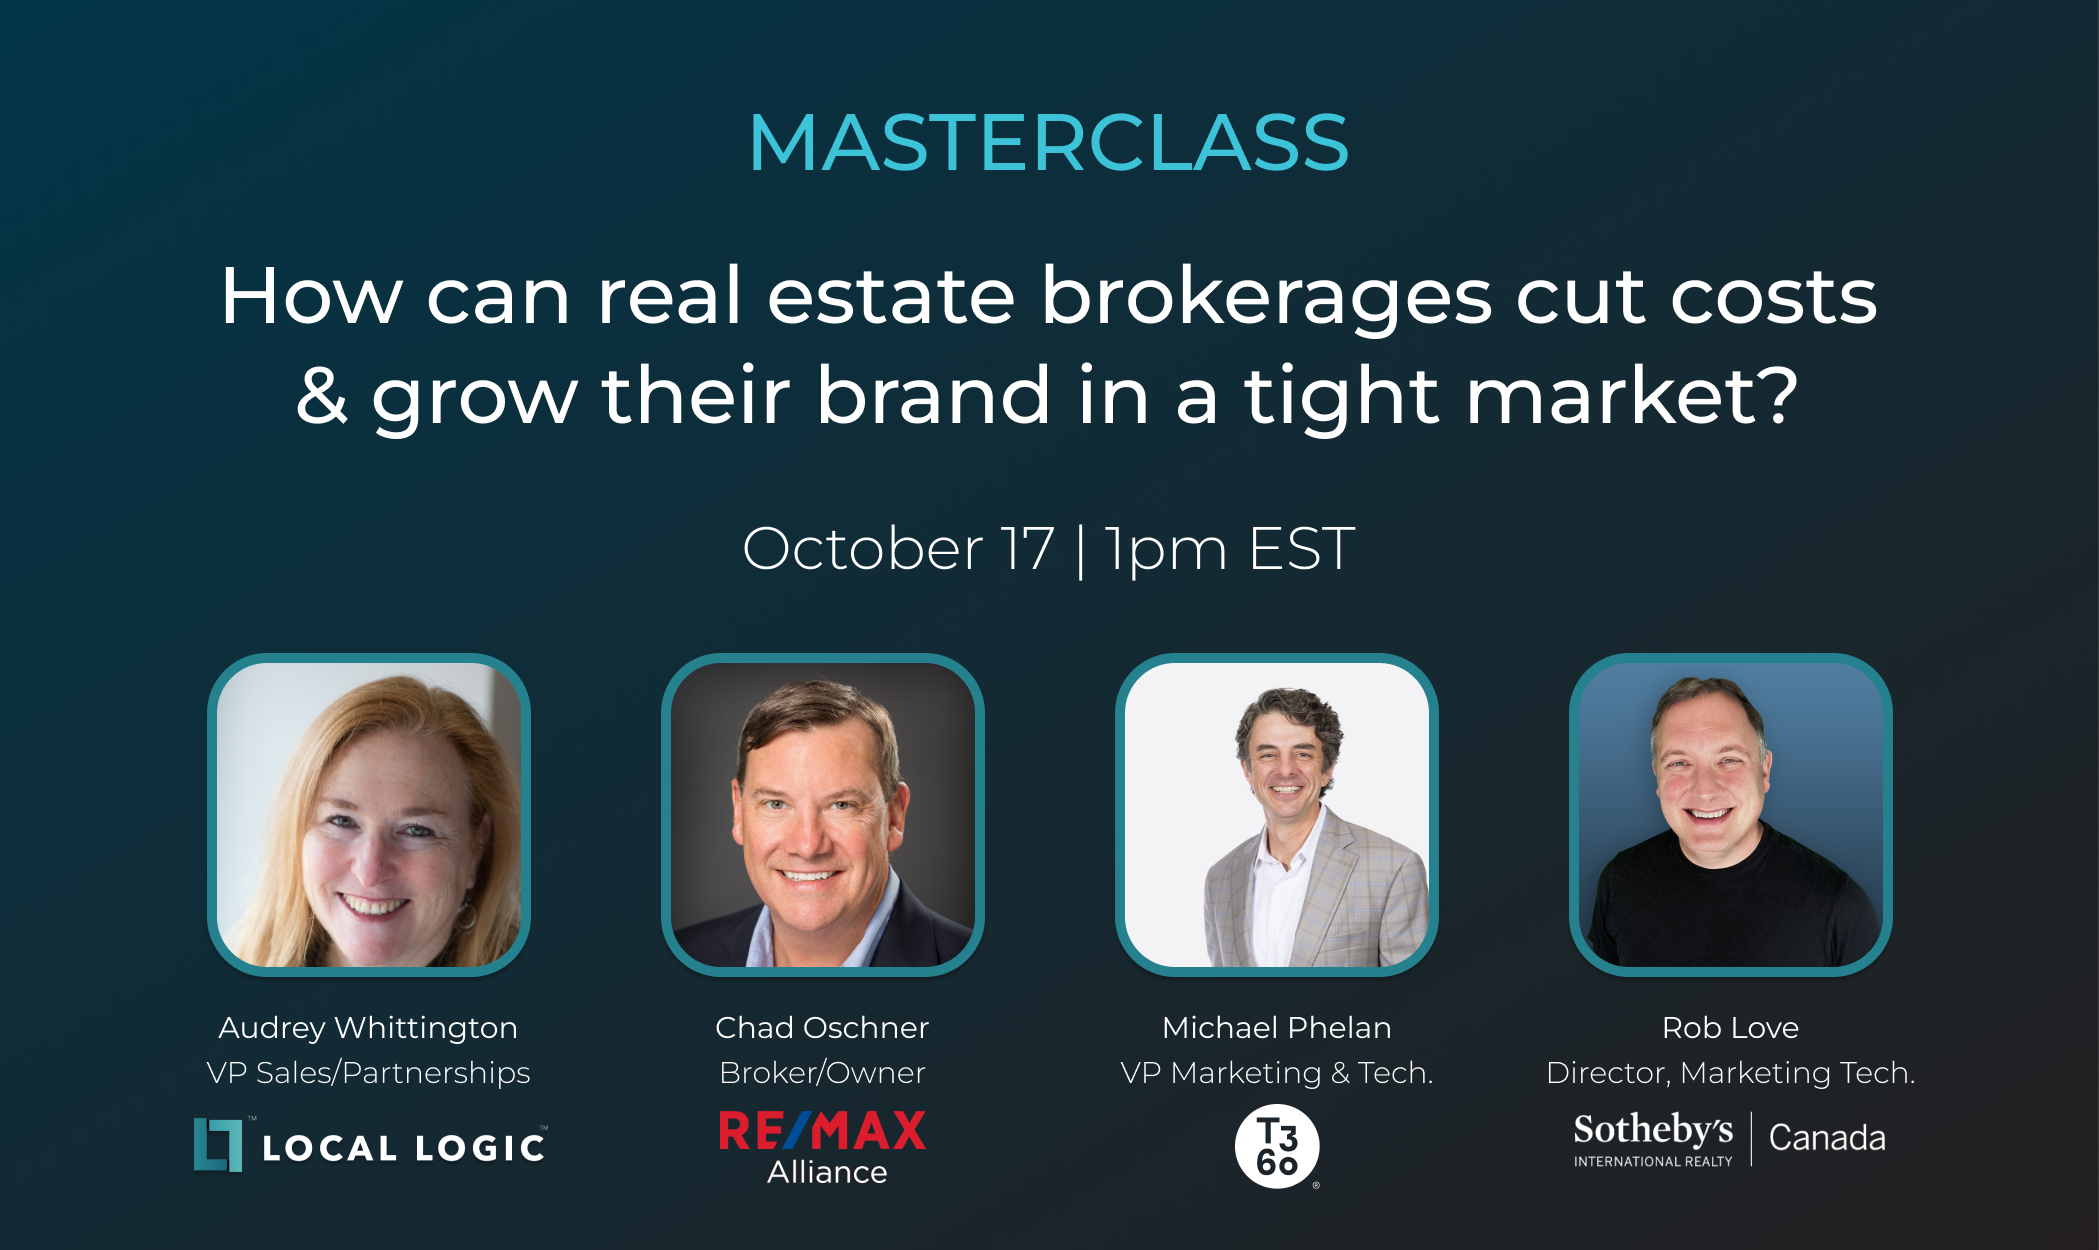 Masterclass - How Real Estate Brokerages can cut costs and grow their brand in a tight market